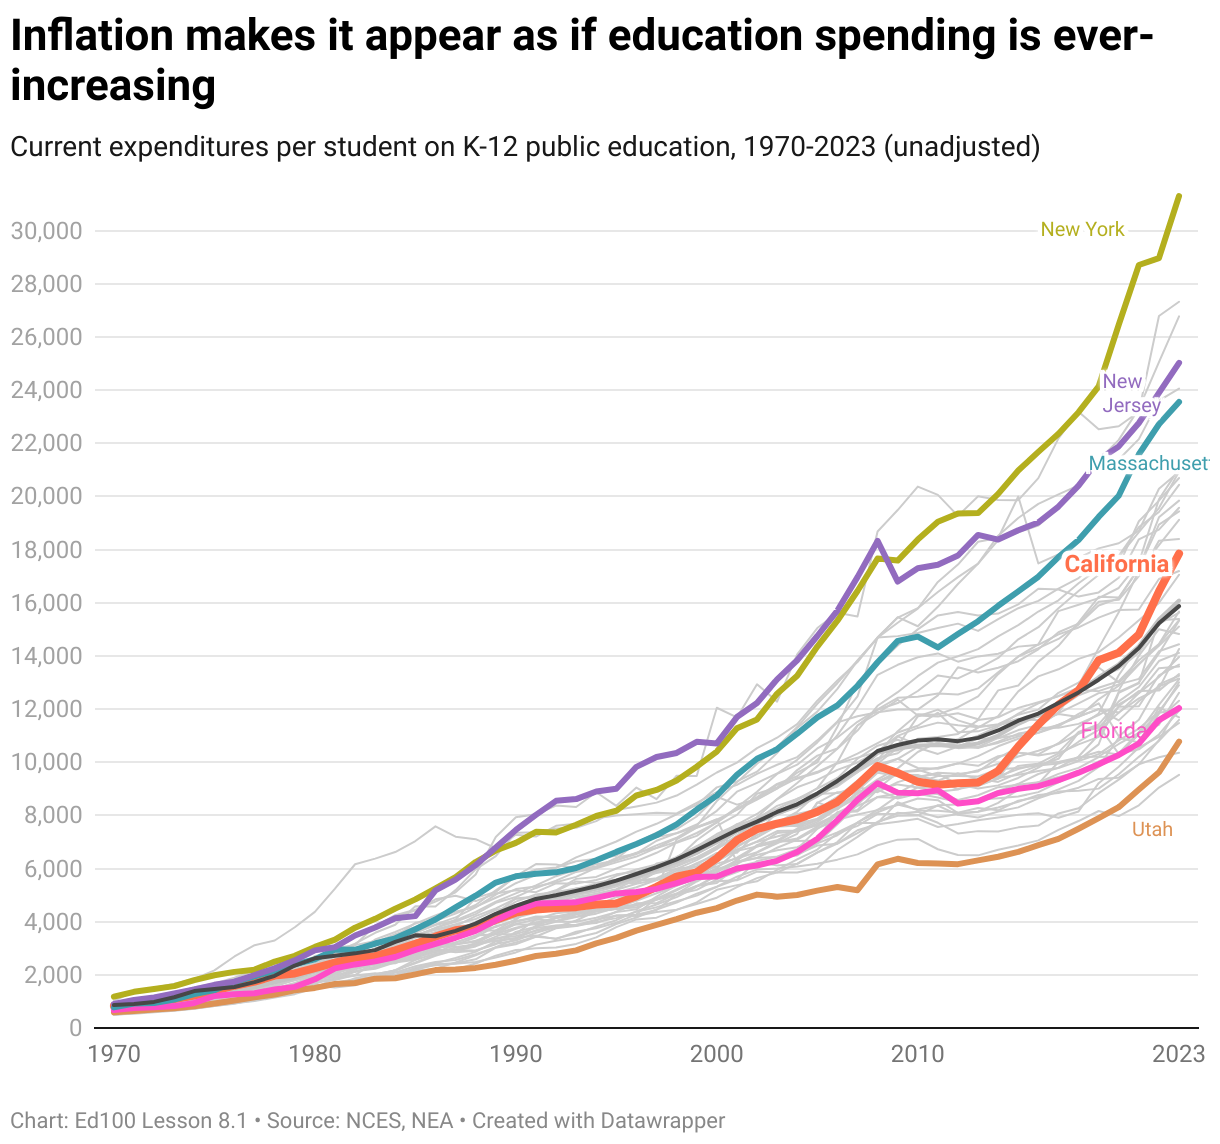 Inflation makes it appear as if education spending is ever-increasing